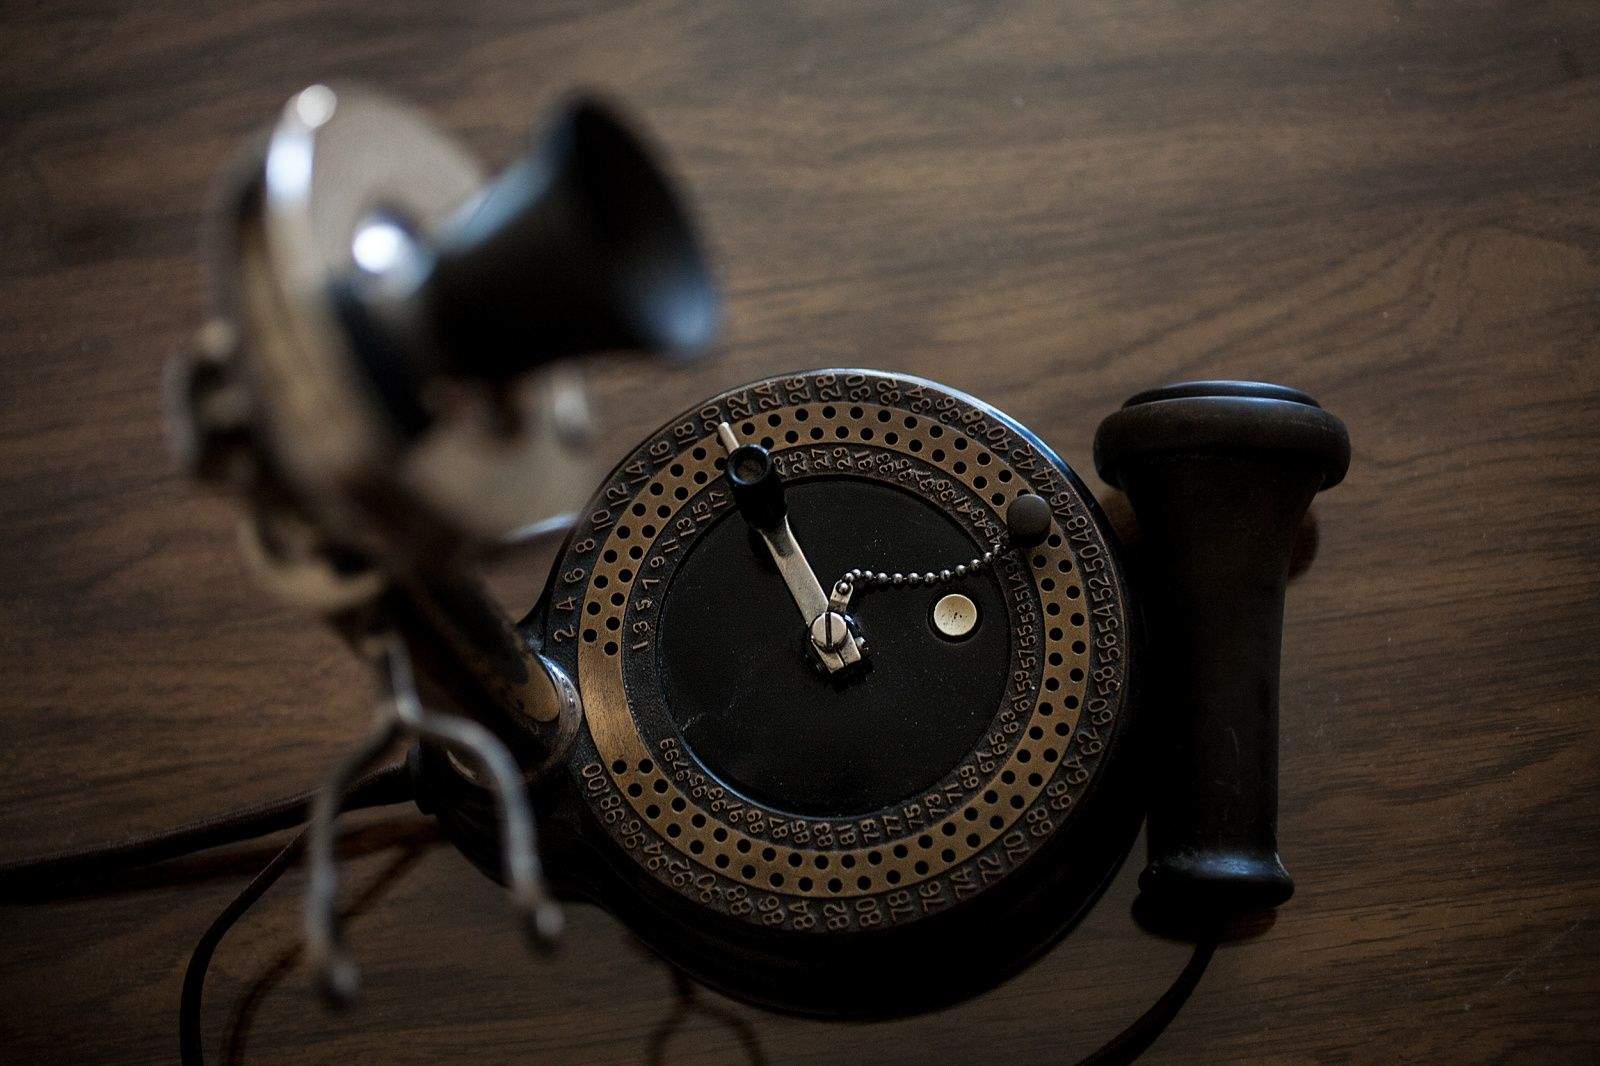 This primitive dial phone was built by Western Electric in 1902 for communities too small for a fulltime operator service. Photo: David Pierini/Cult of Mac